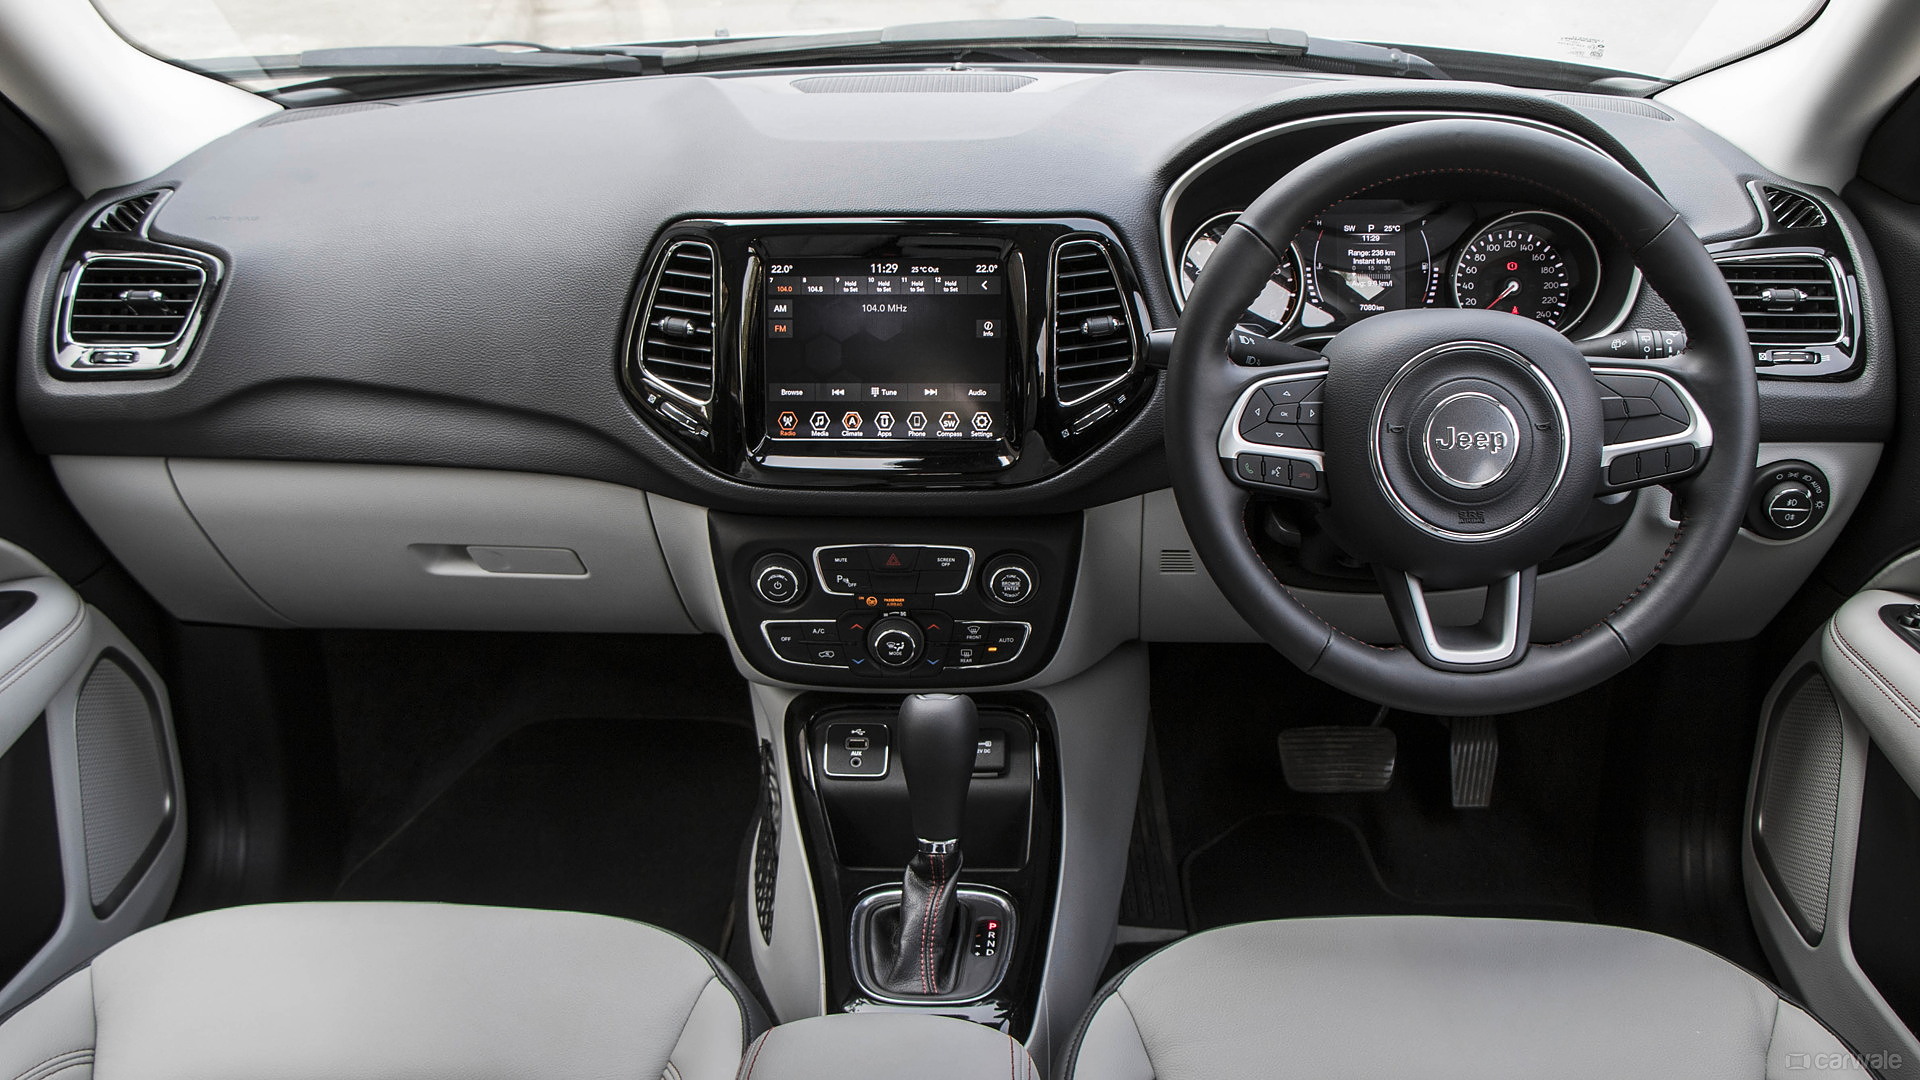 Jeep Compass Images Interior Exterior Photo Gallery Carwale